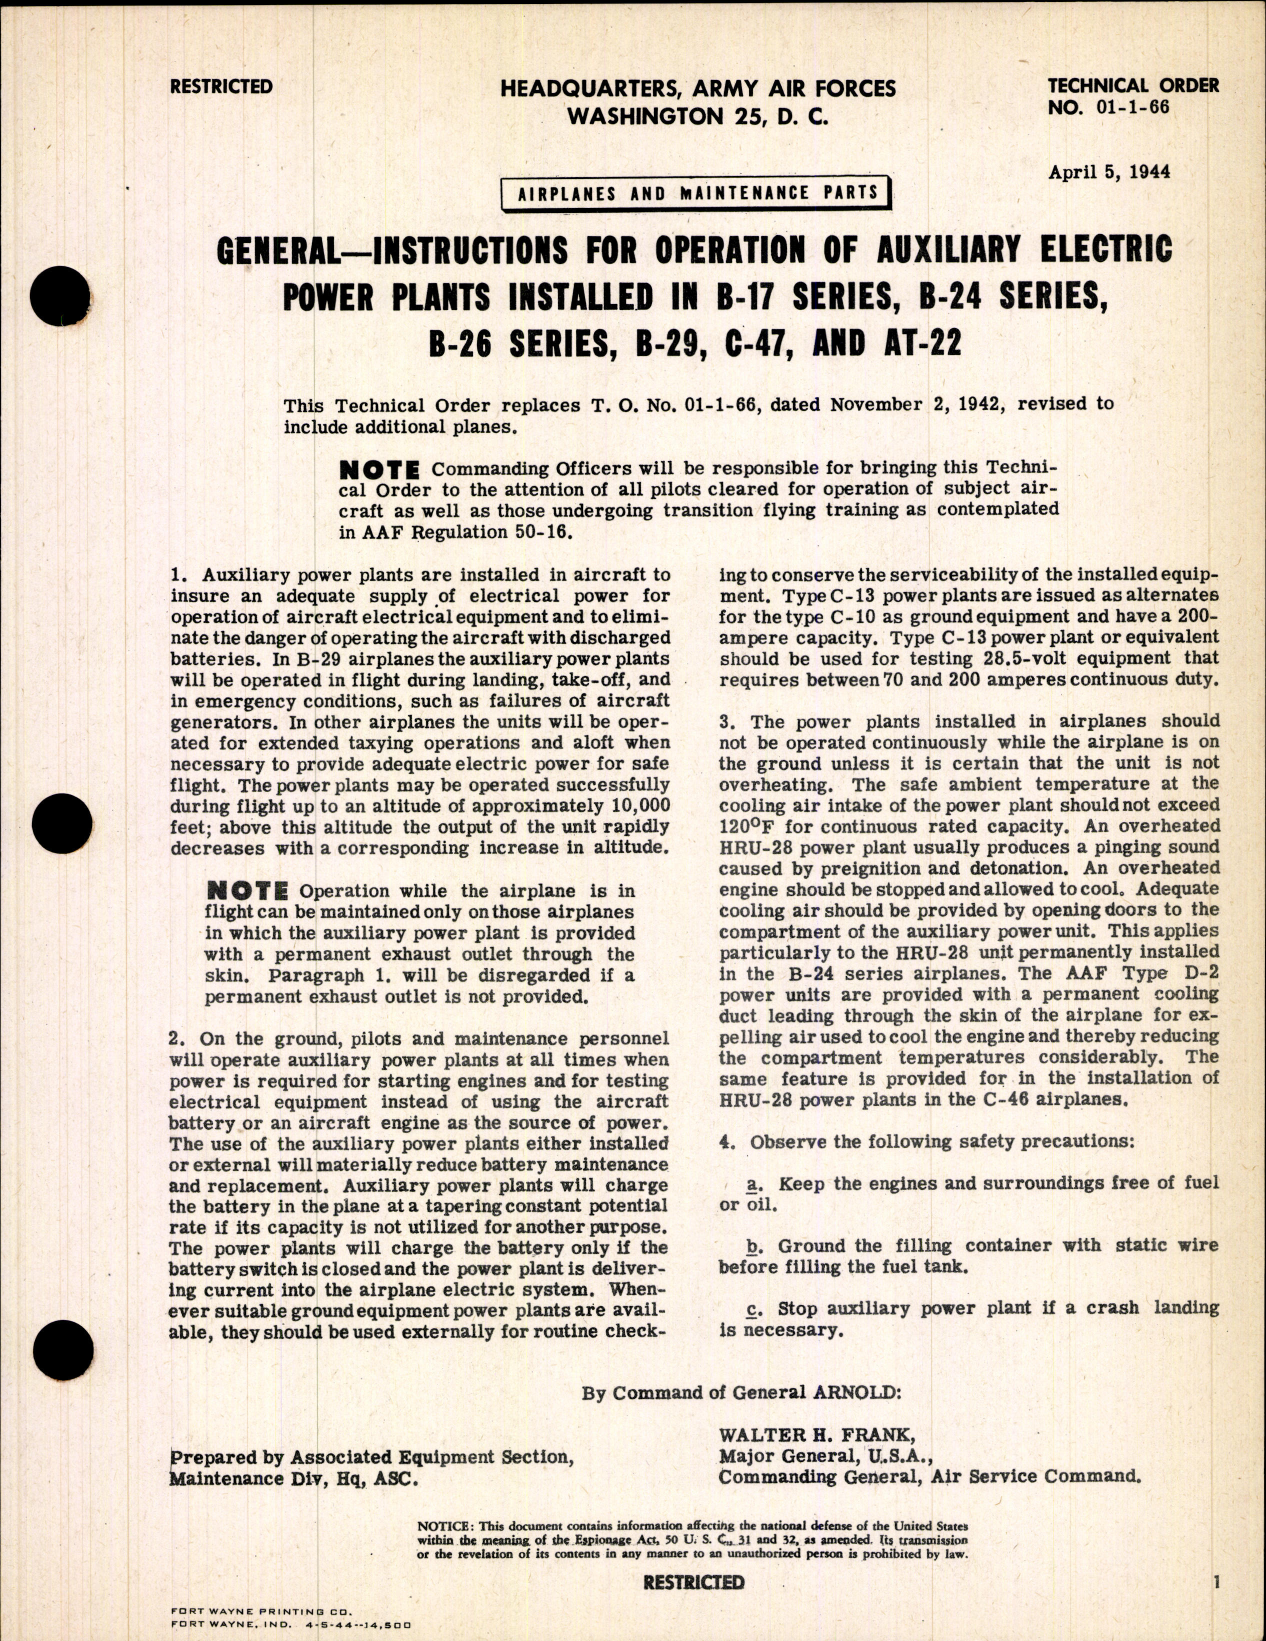 Sample page 1 from AirCorps Library document: Instructions for Operation of Auxiliary Electric Power Plants Installed in B-17, B-24, B-26, B-29, C-47, and AT-22 Series